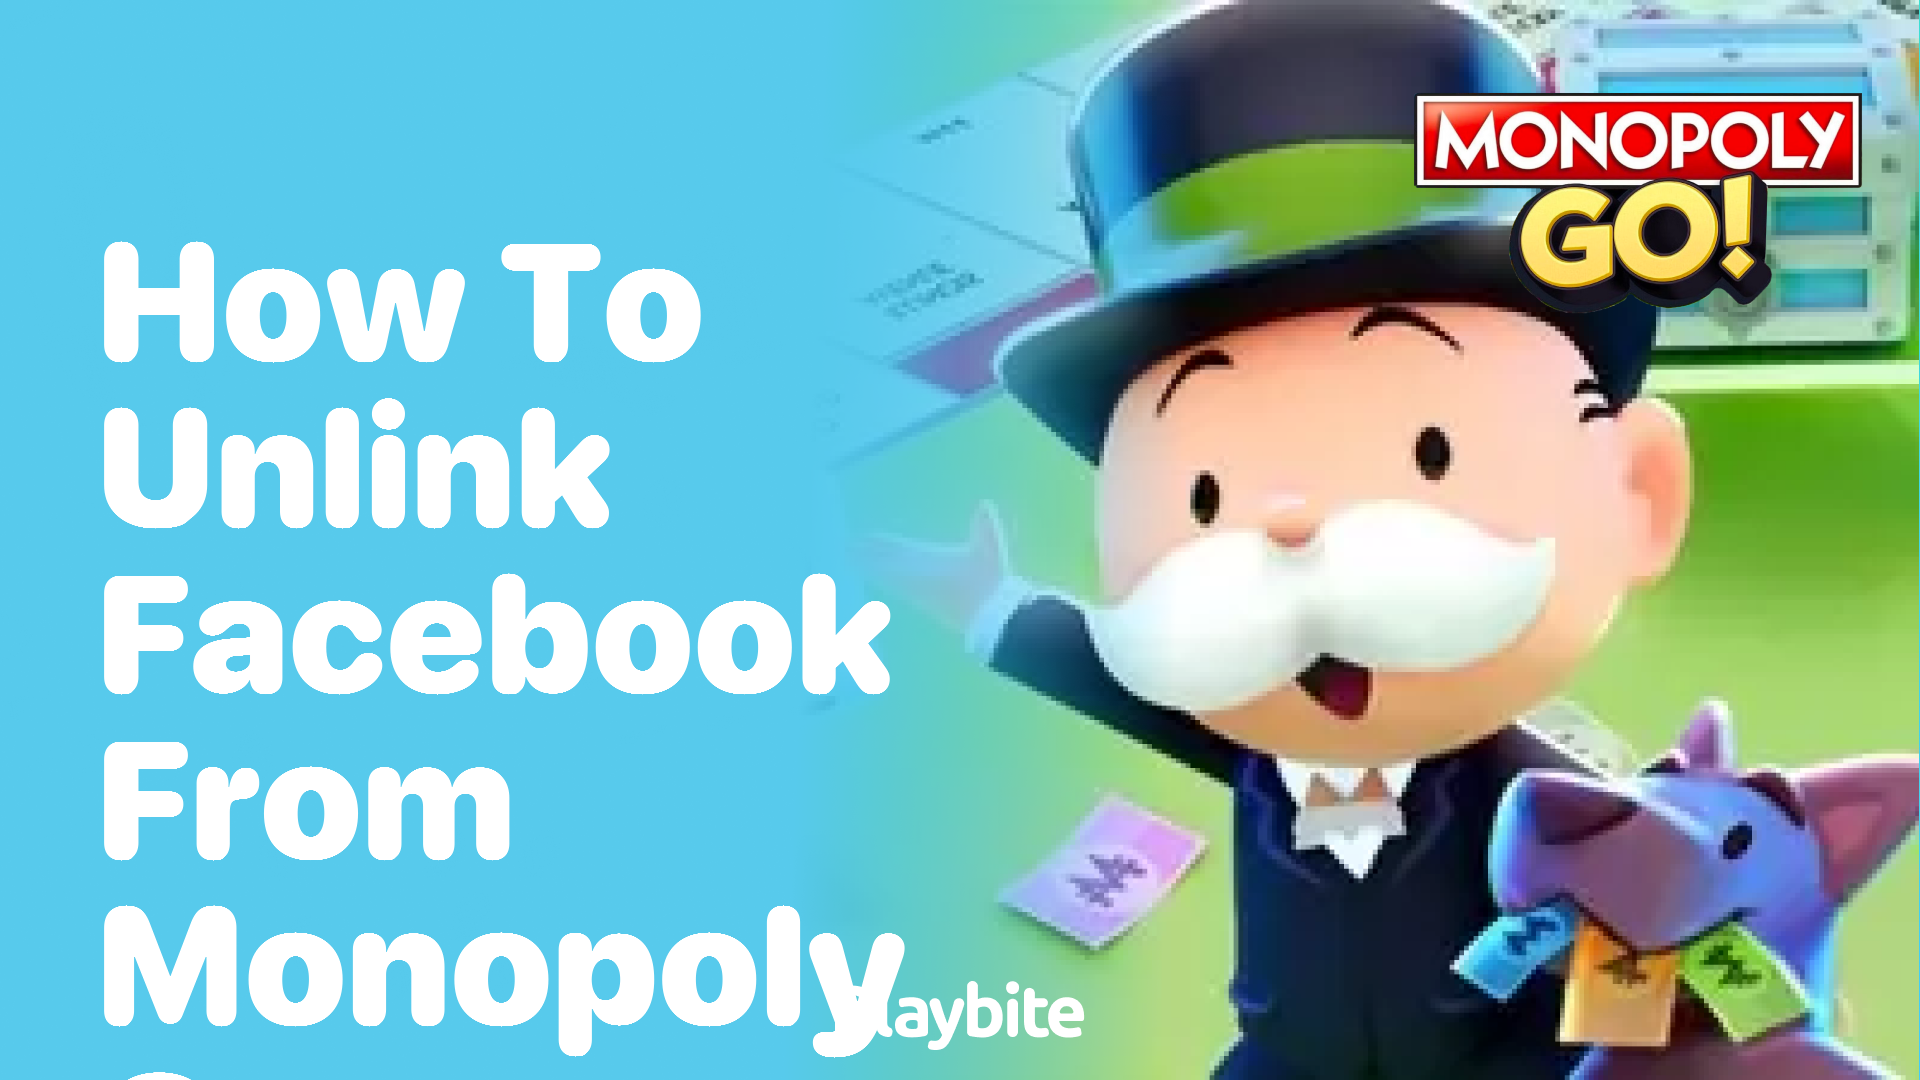 How to Unlink Facebook from Monopoly Go